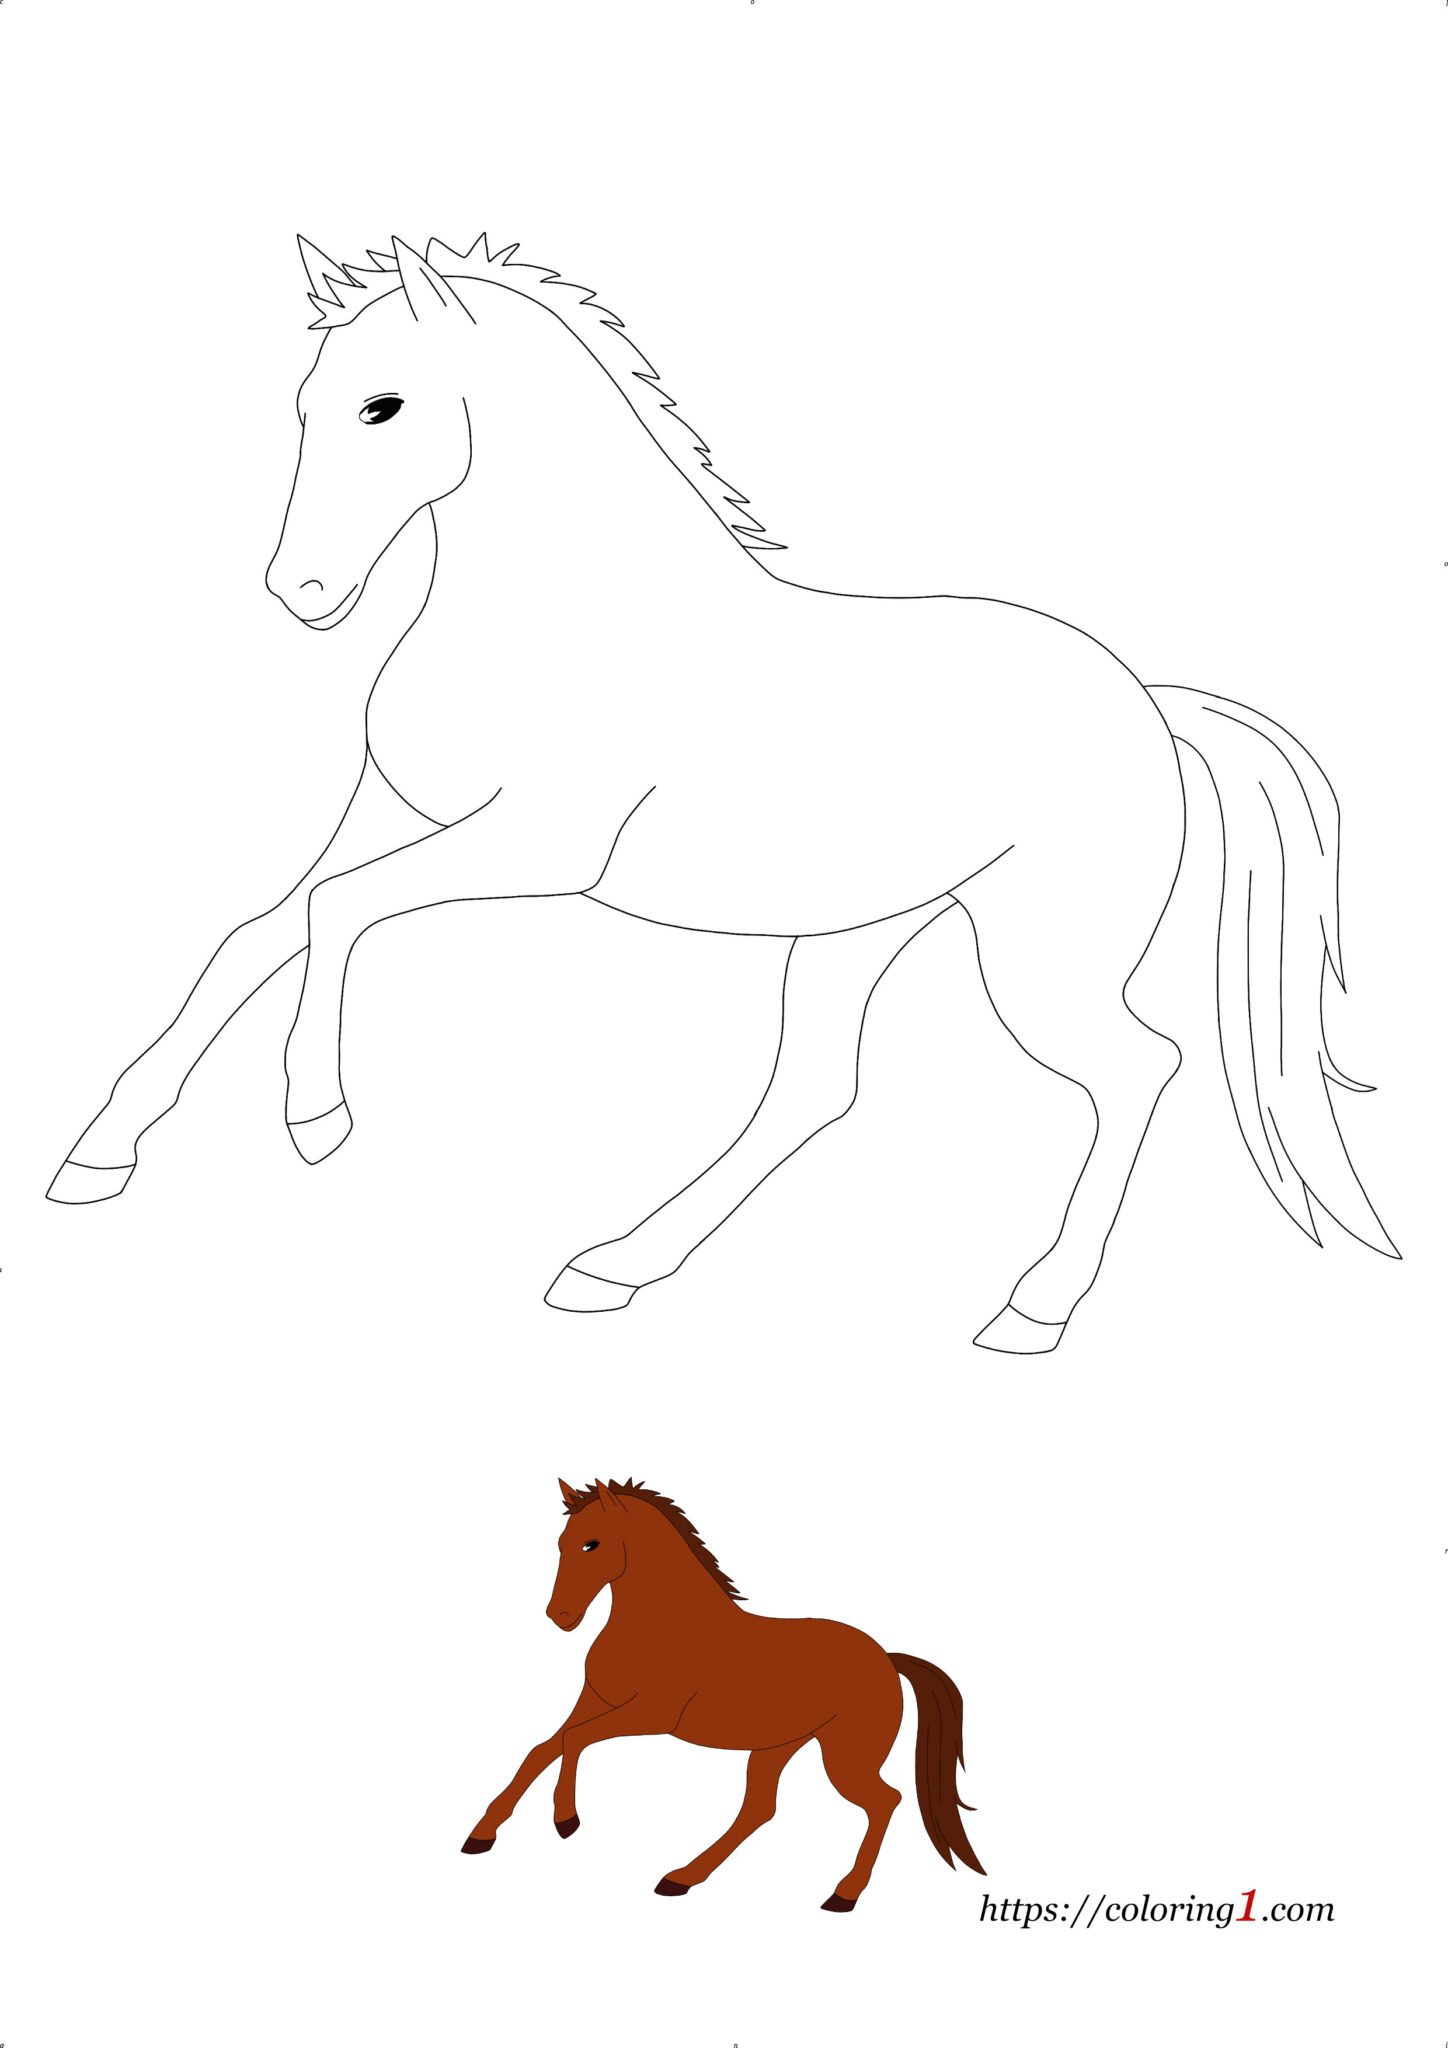 Wild Horse Coloring Pages - 2 Free Coloring Sheets (2021)